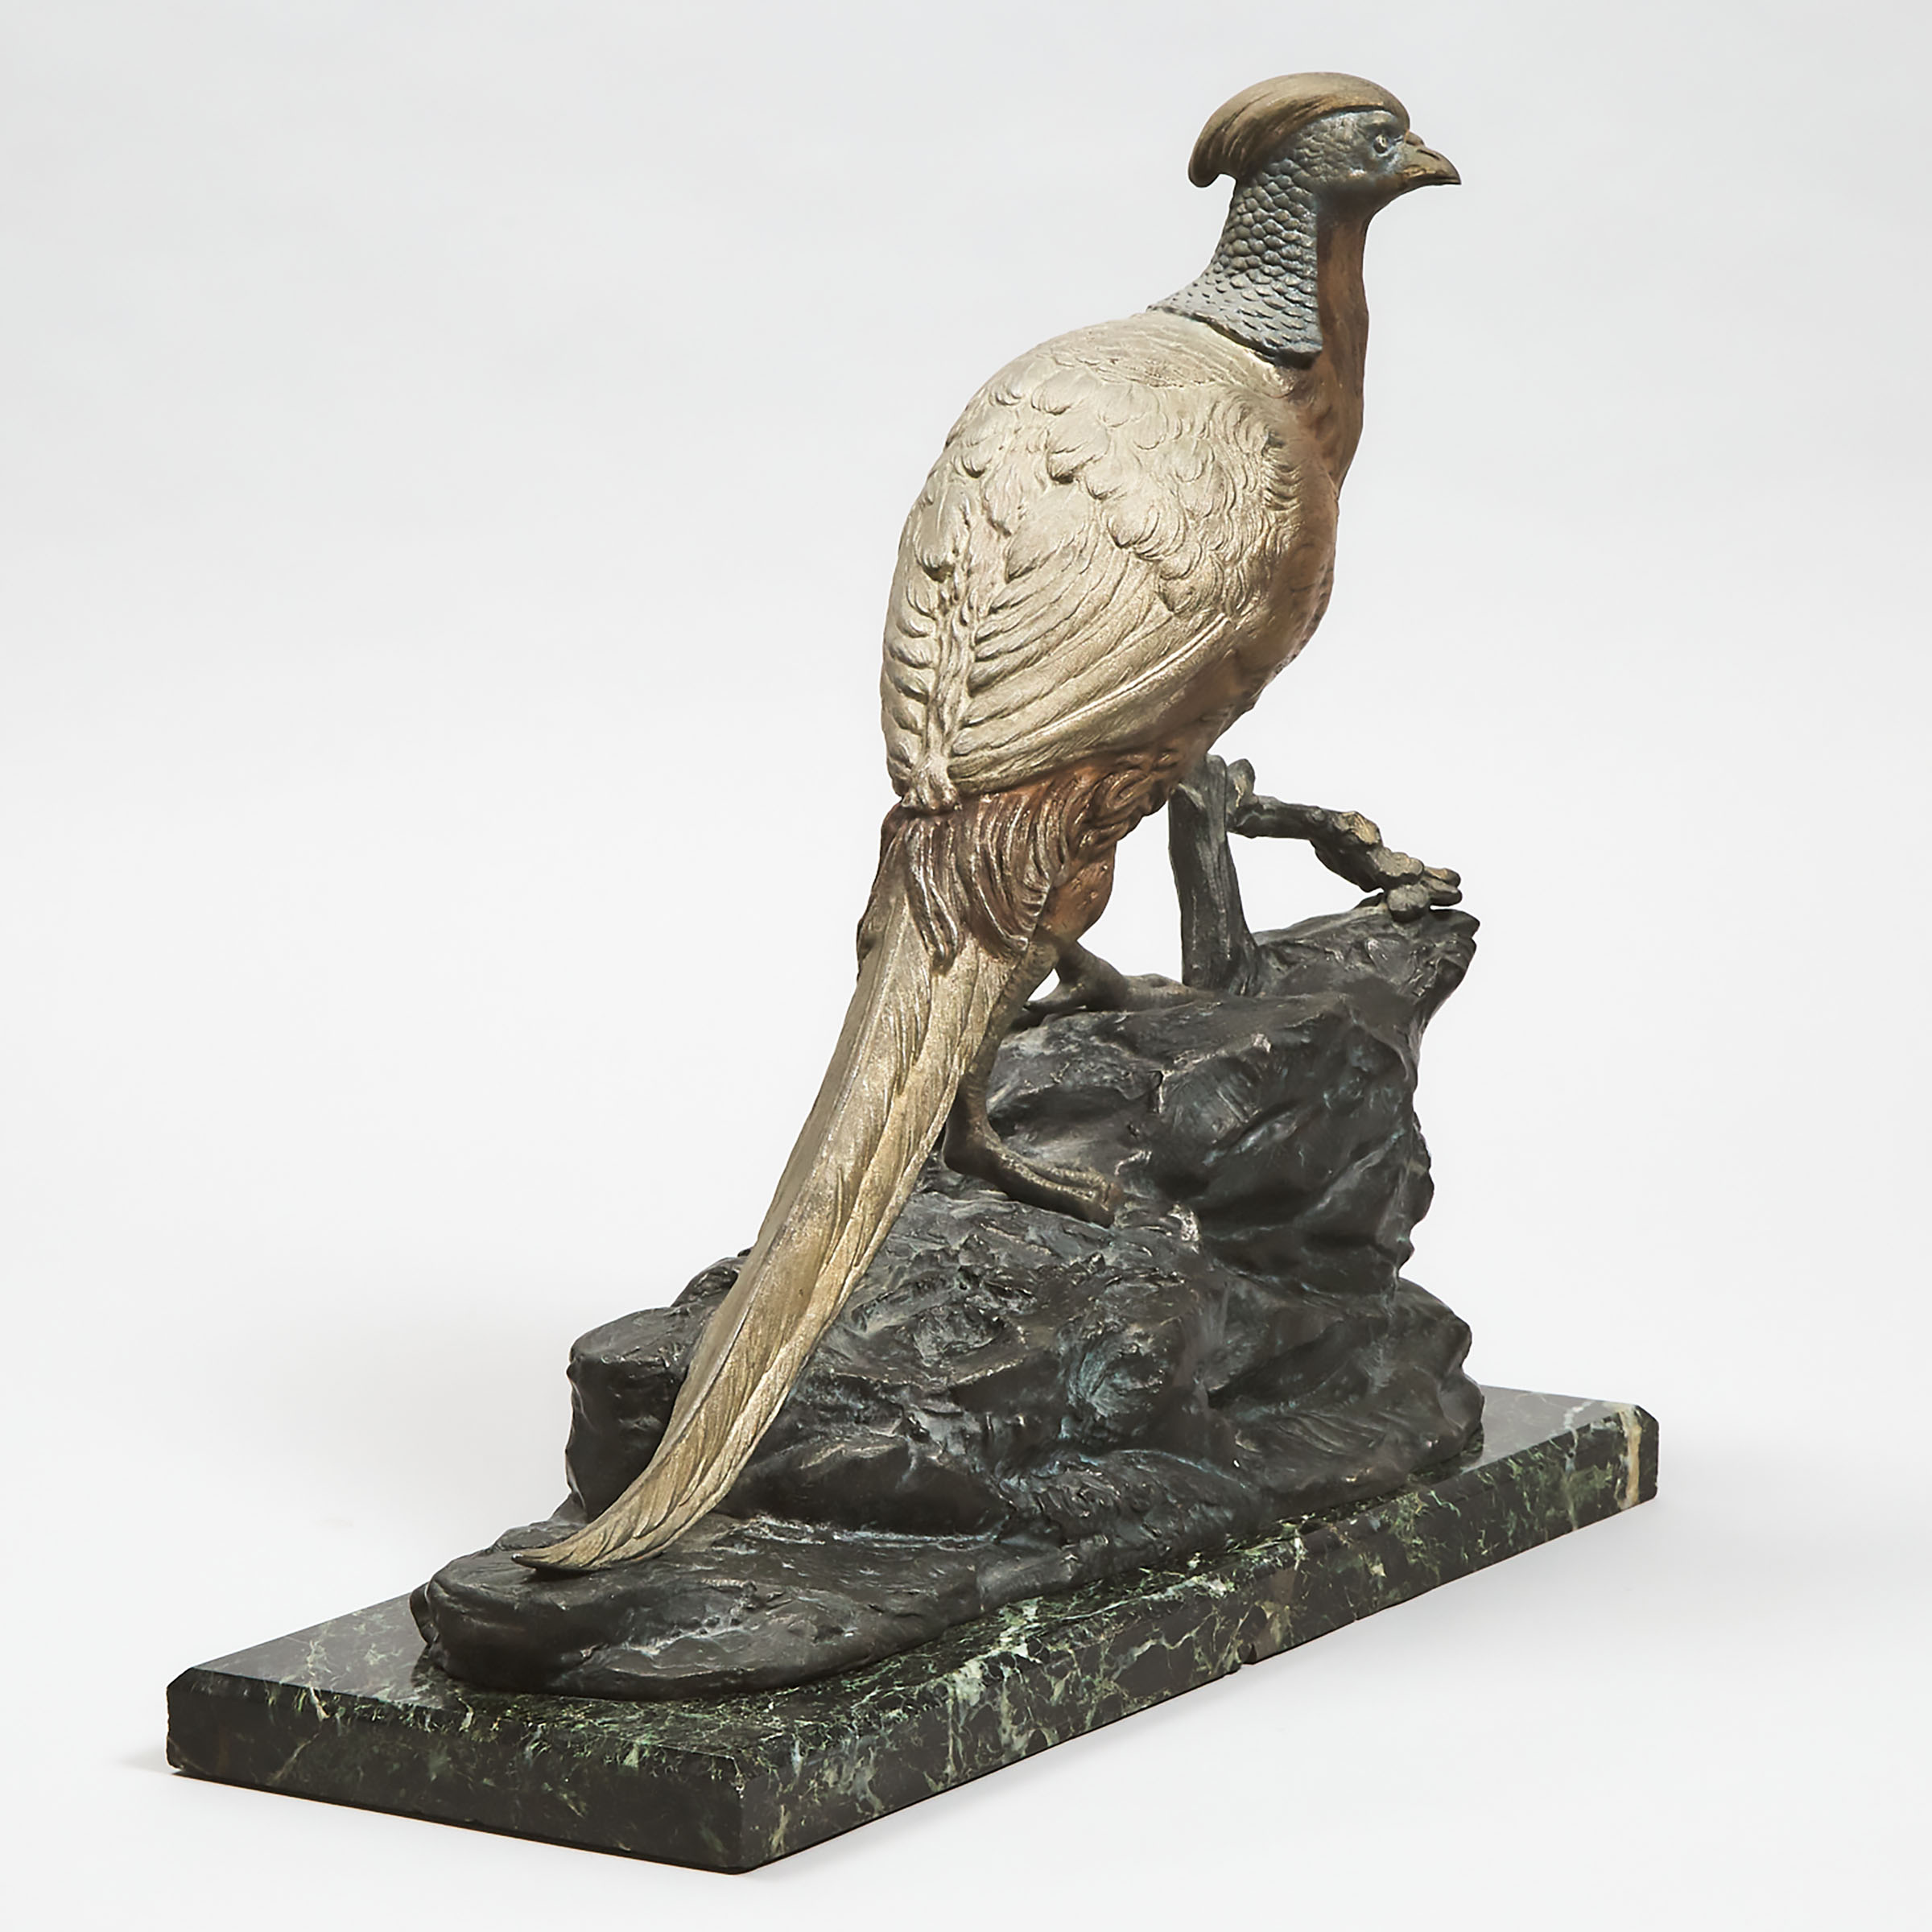 Cold Painted White Metal Model of a Golden Pheasant, c.1900